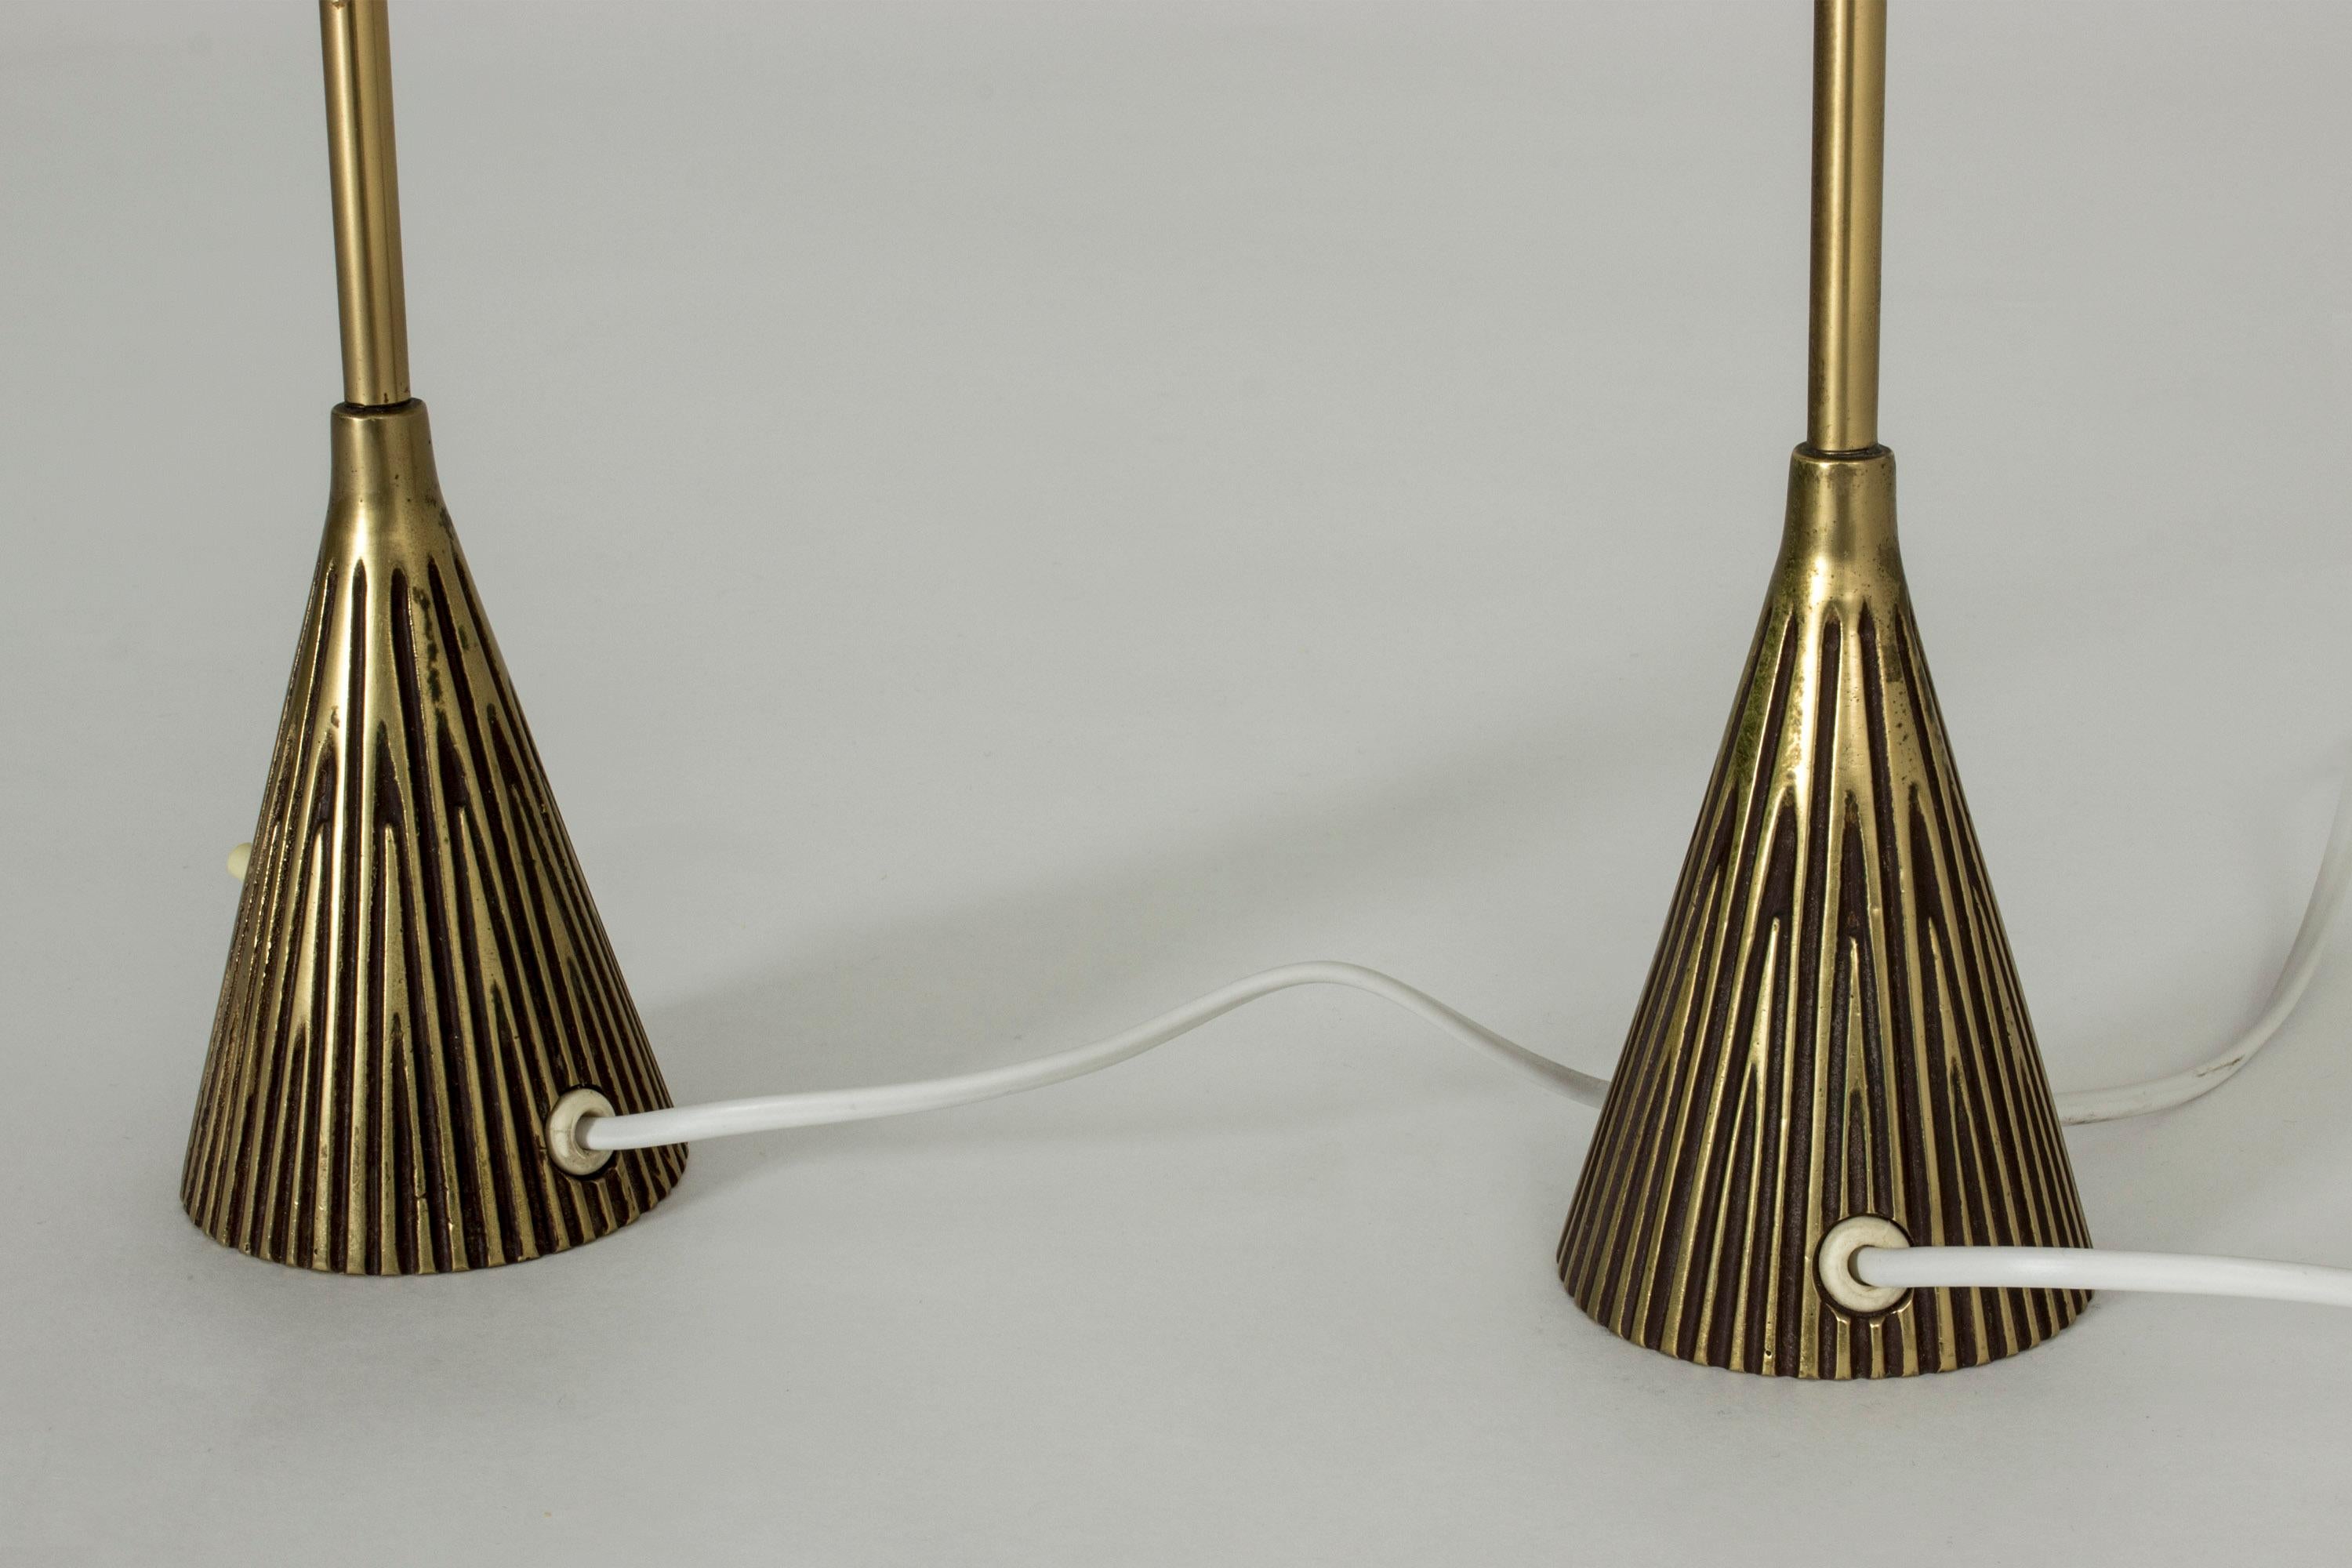 Swedish Pair of Brass Table Lamps by Sonja Katrin for ASEA